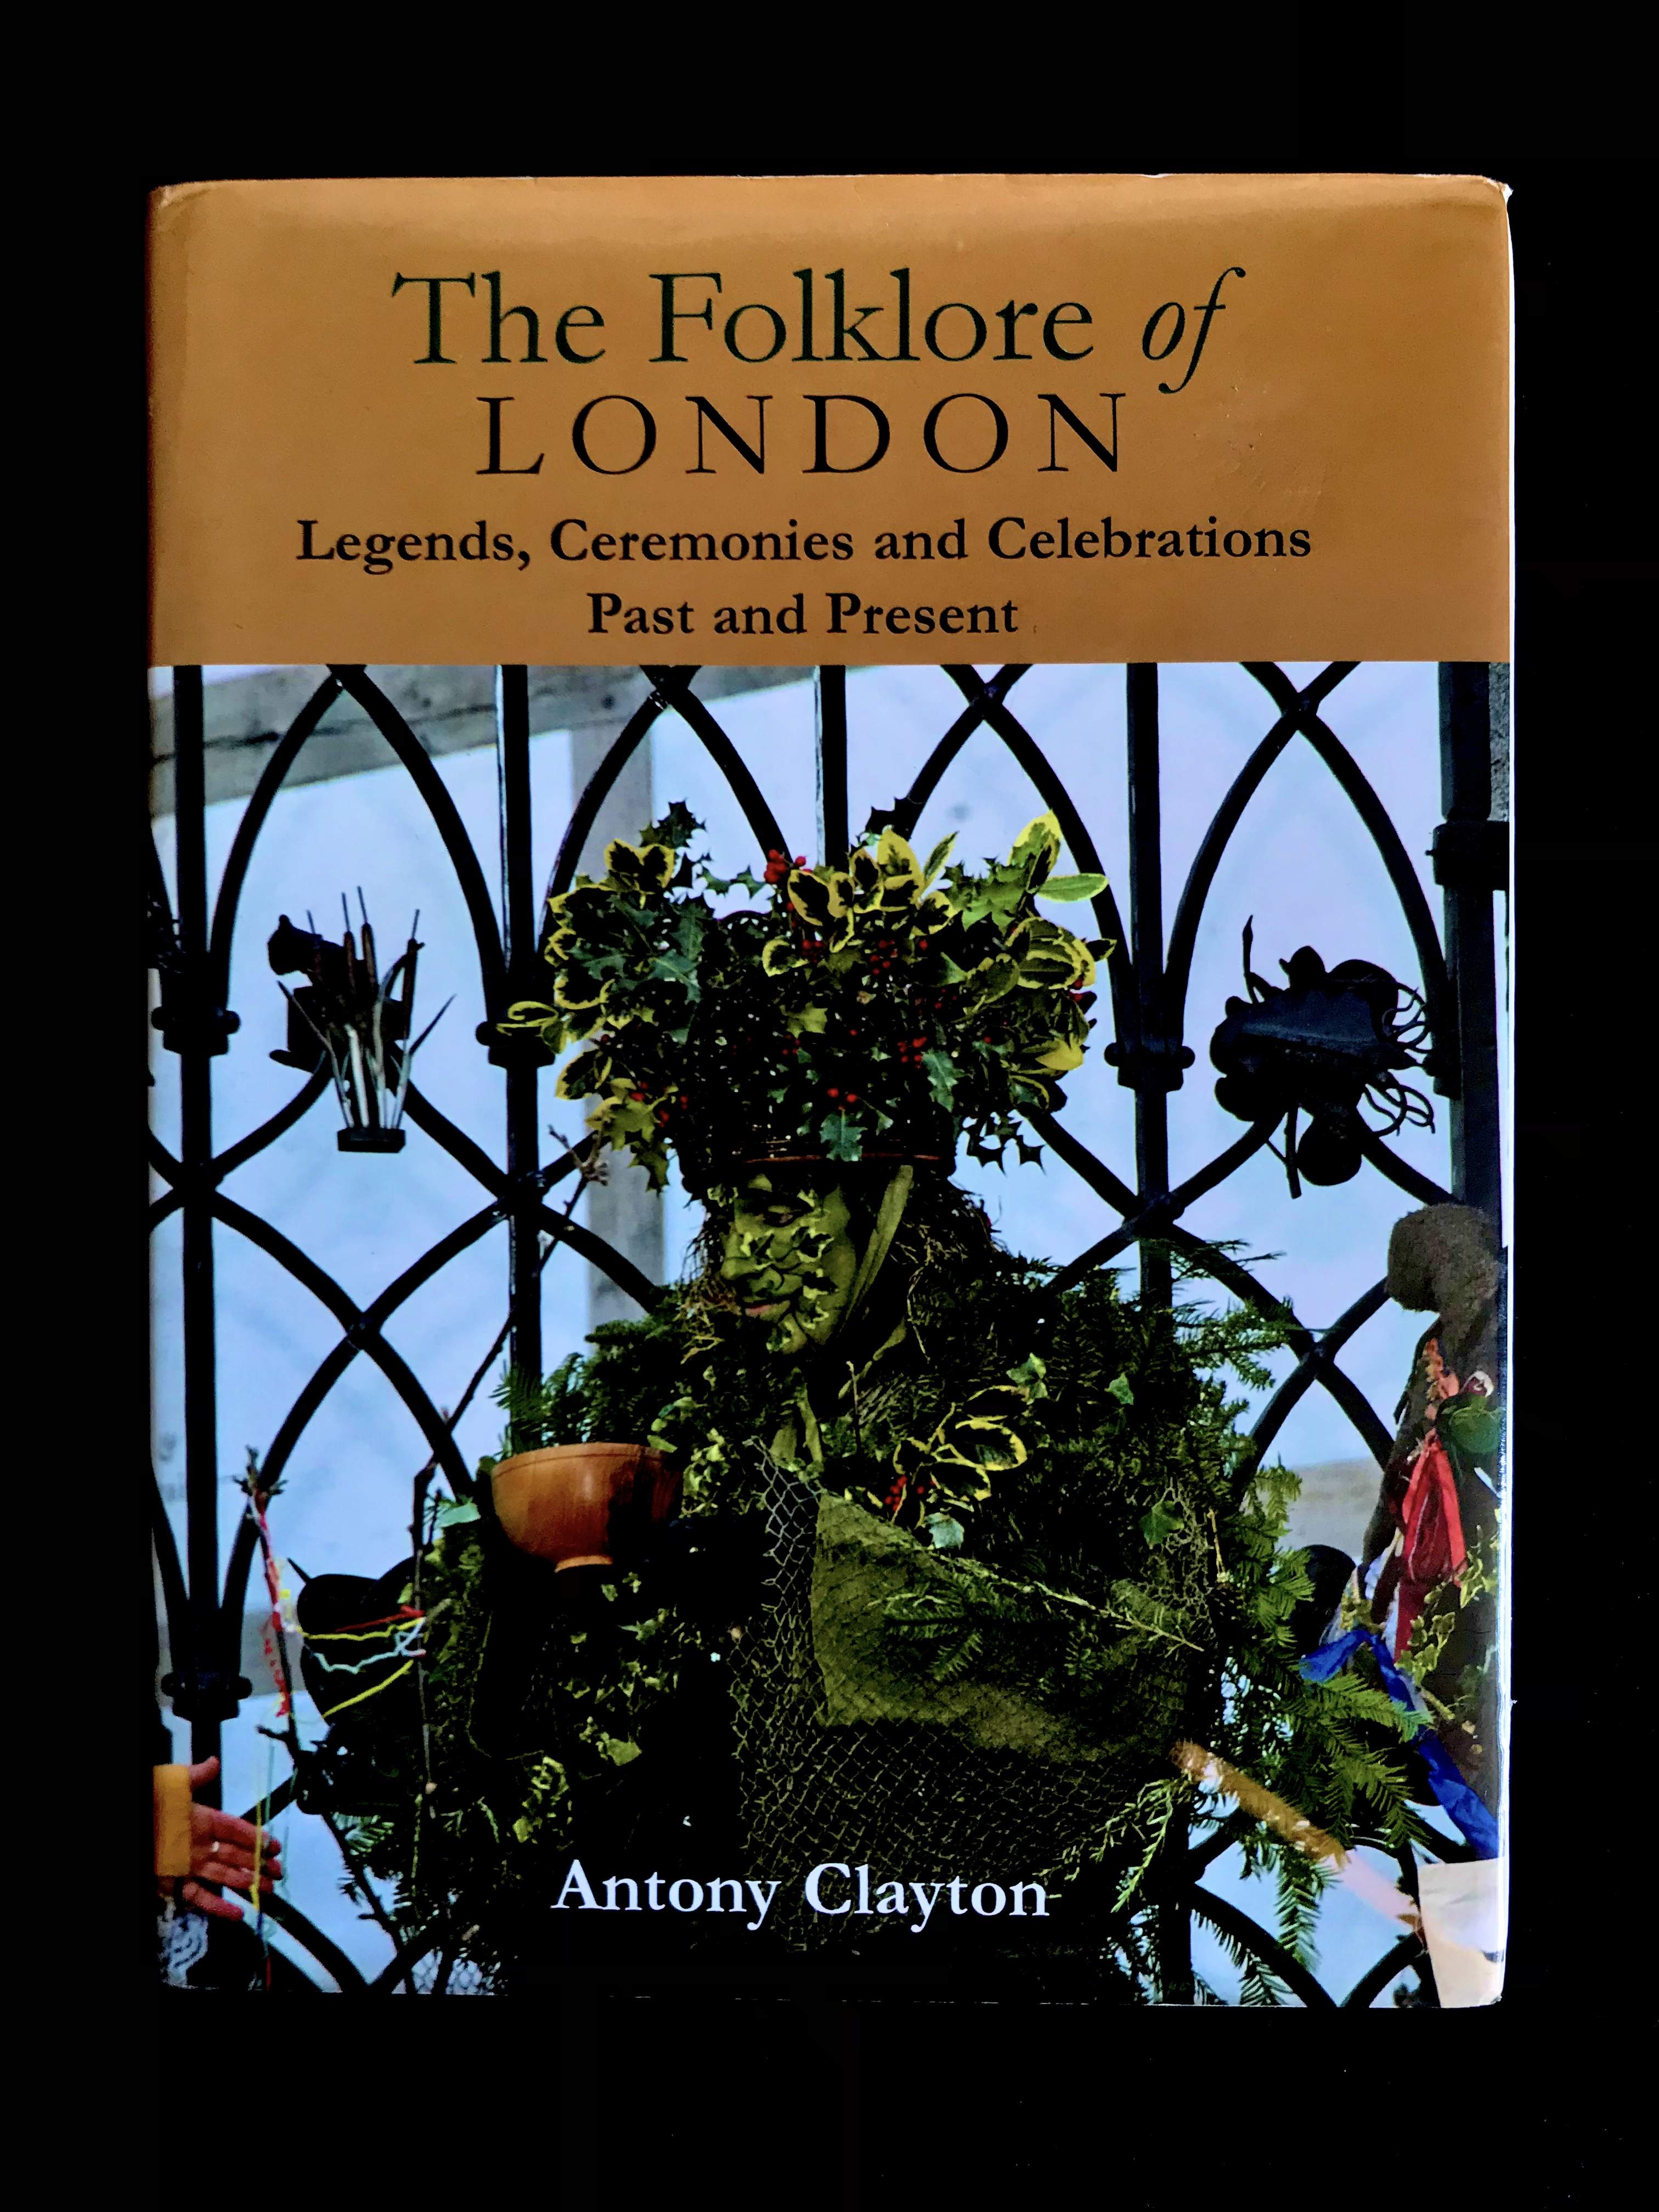 The Folklore of London by Antony Clayton